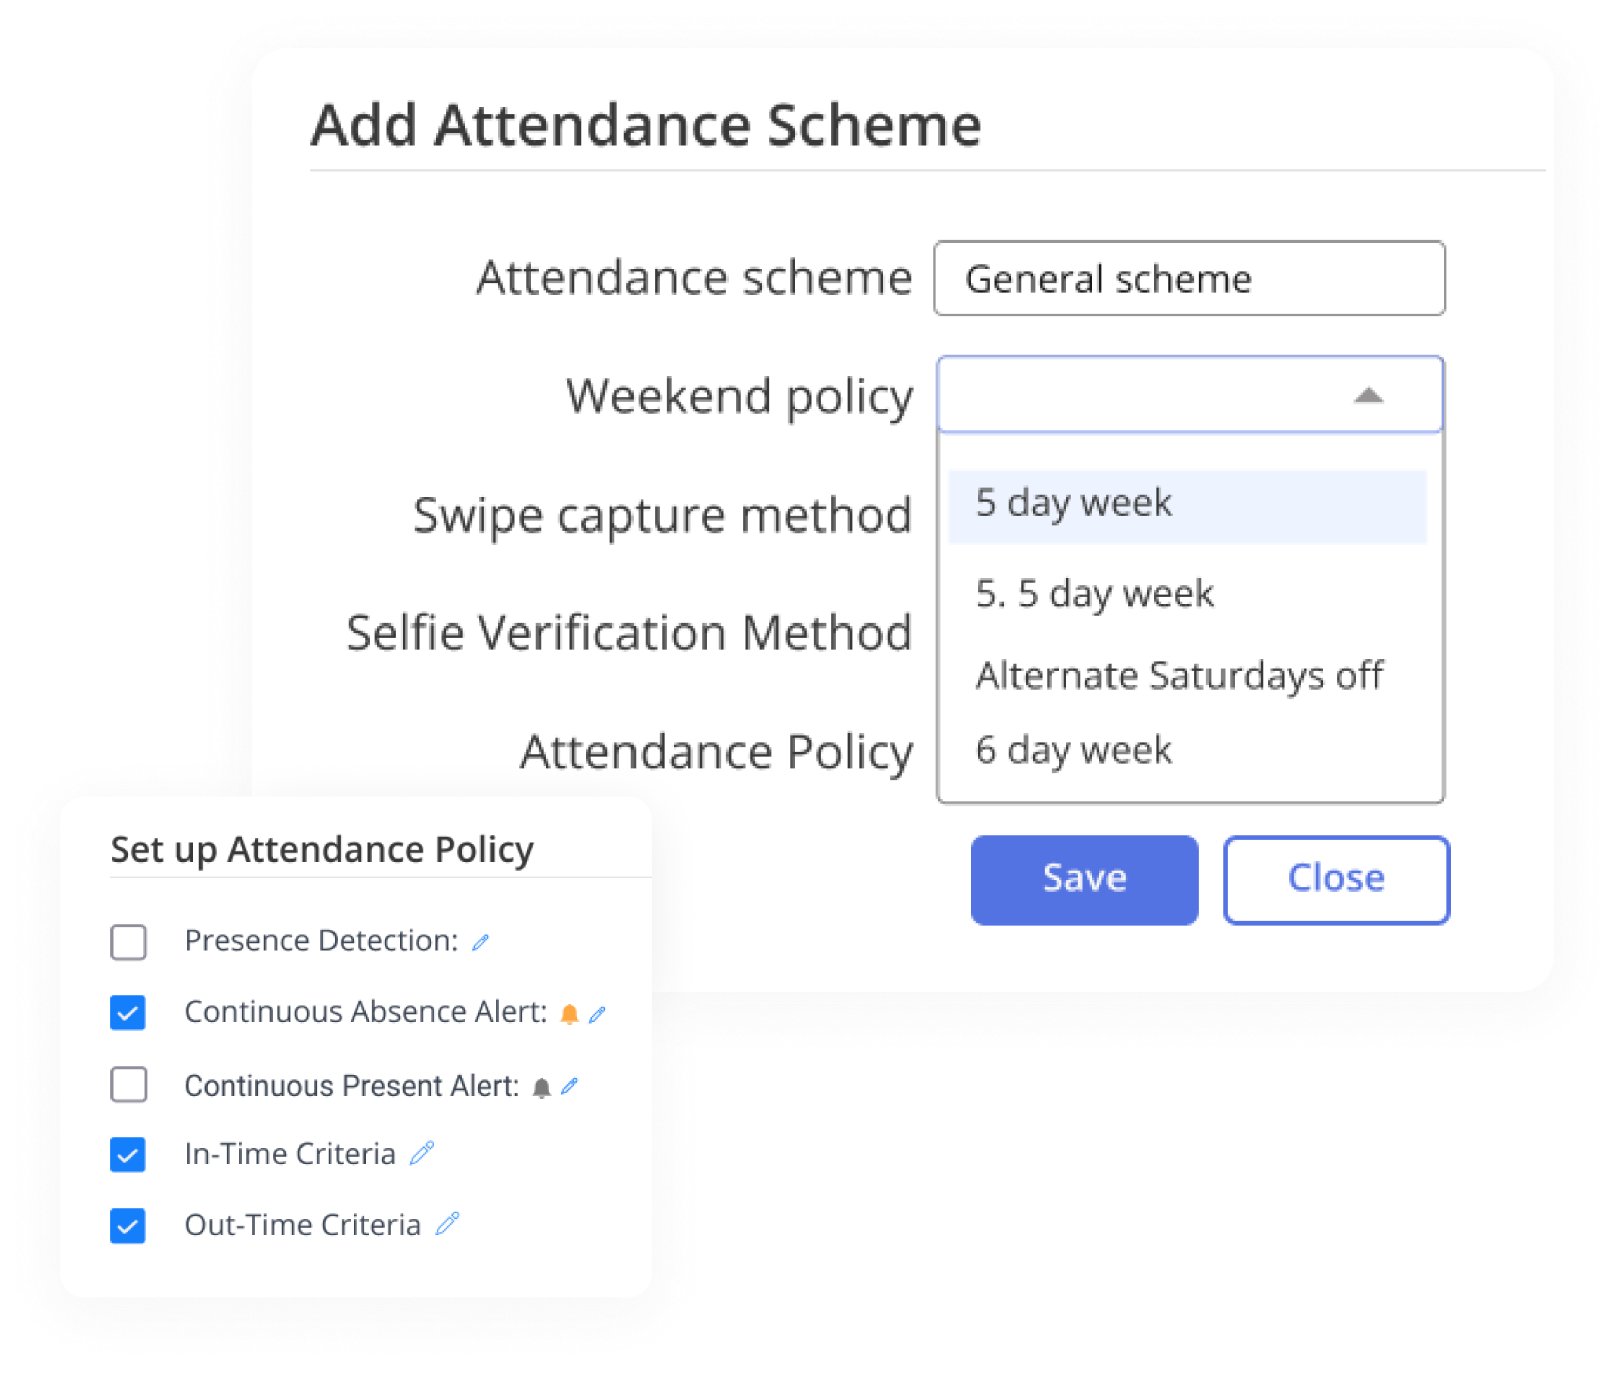 Attendance Policy and Scheme